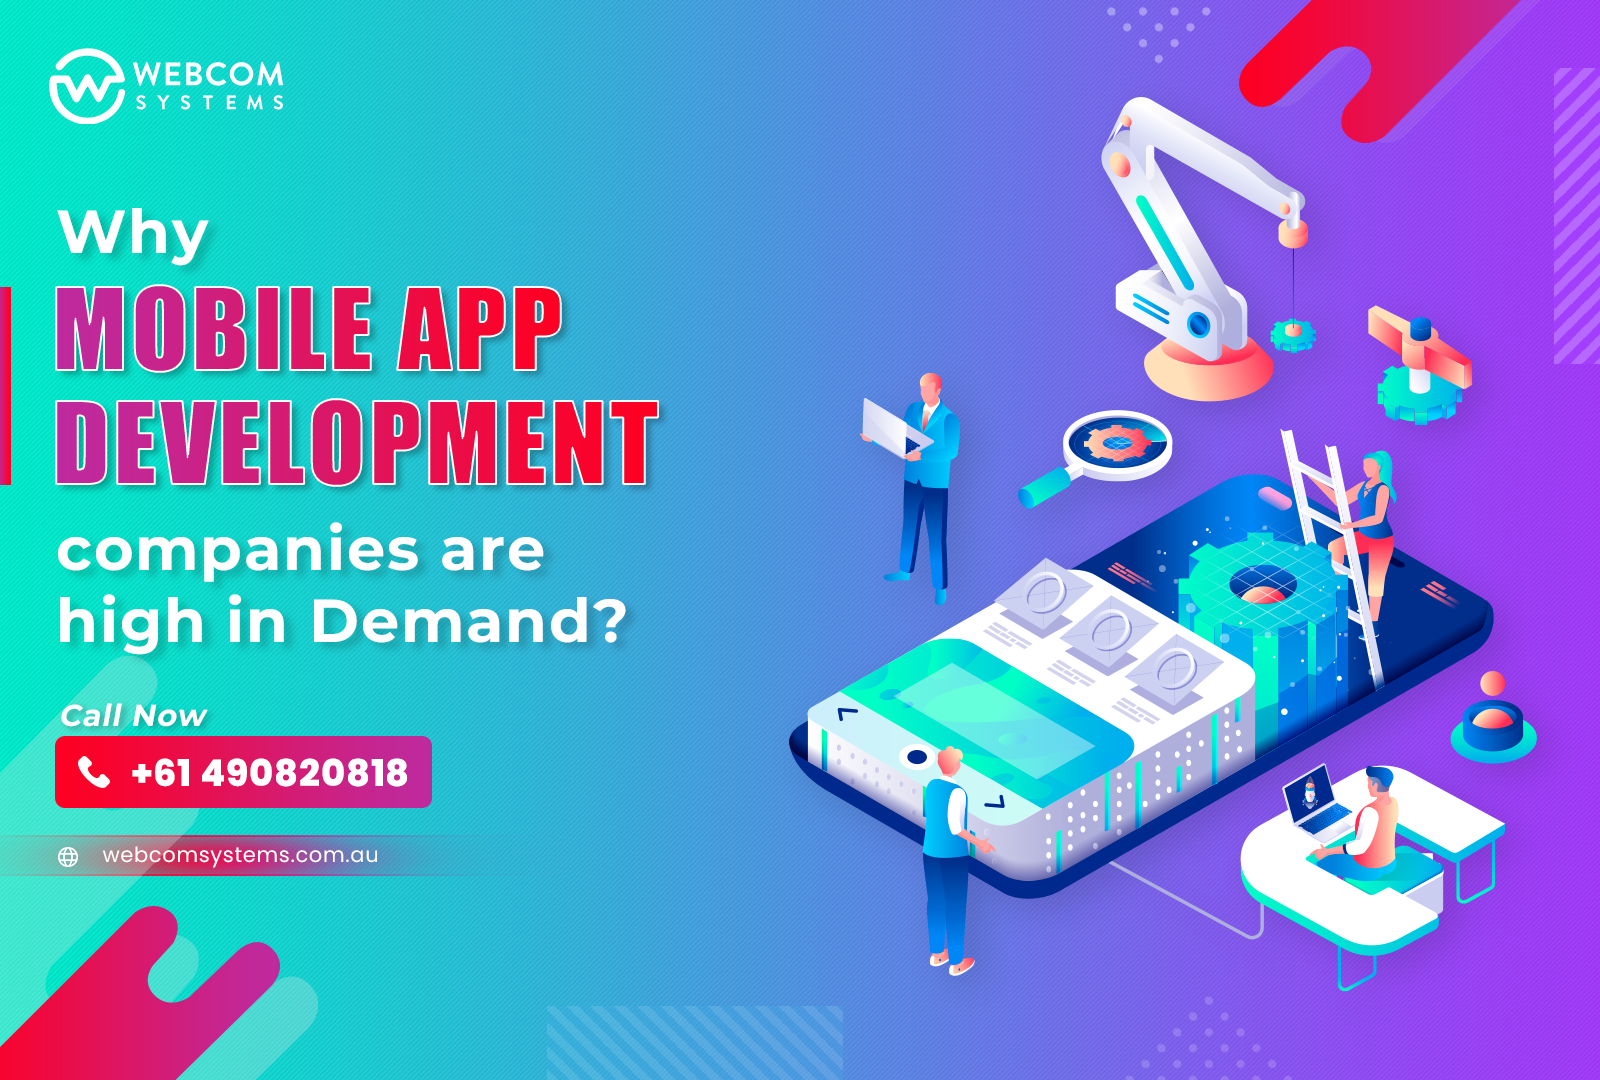 Why Mobile app development companies are high in Demand